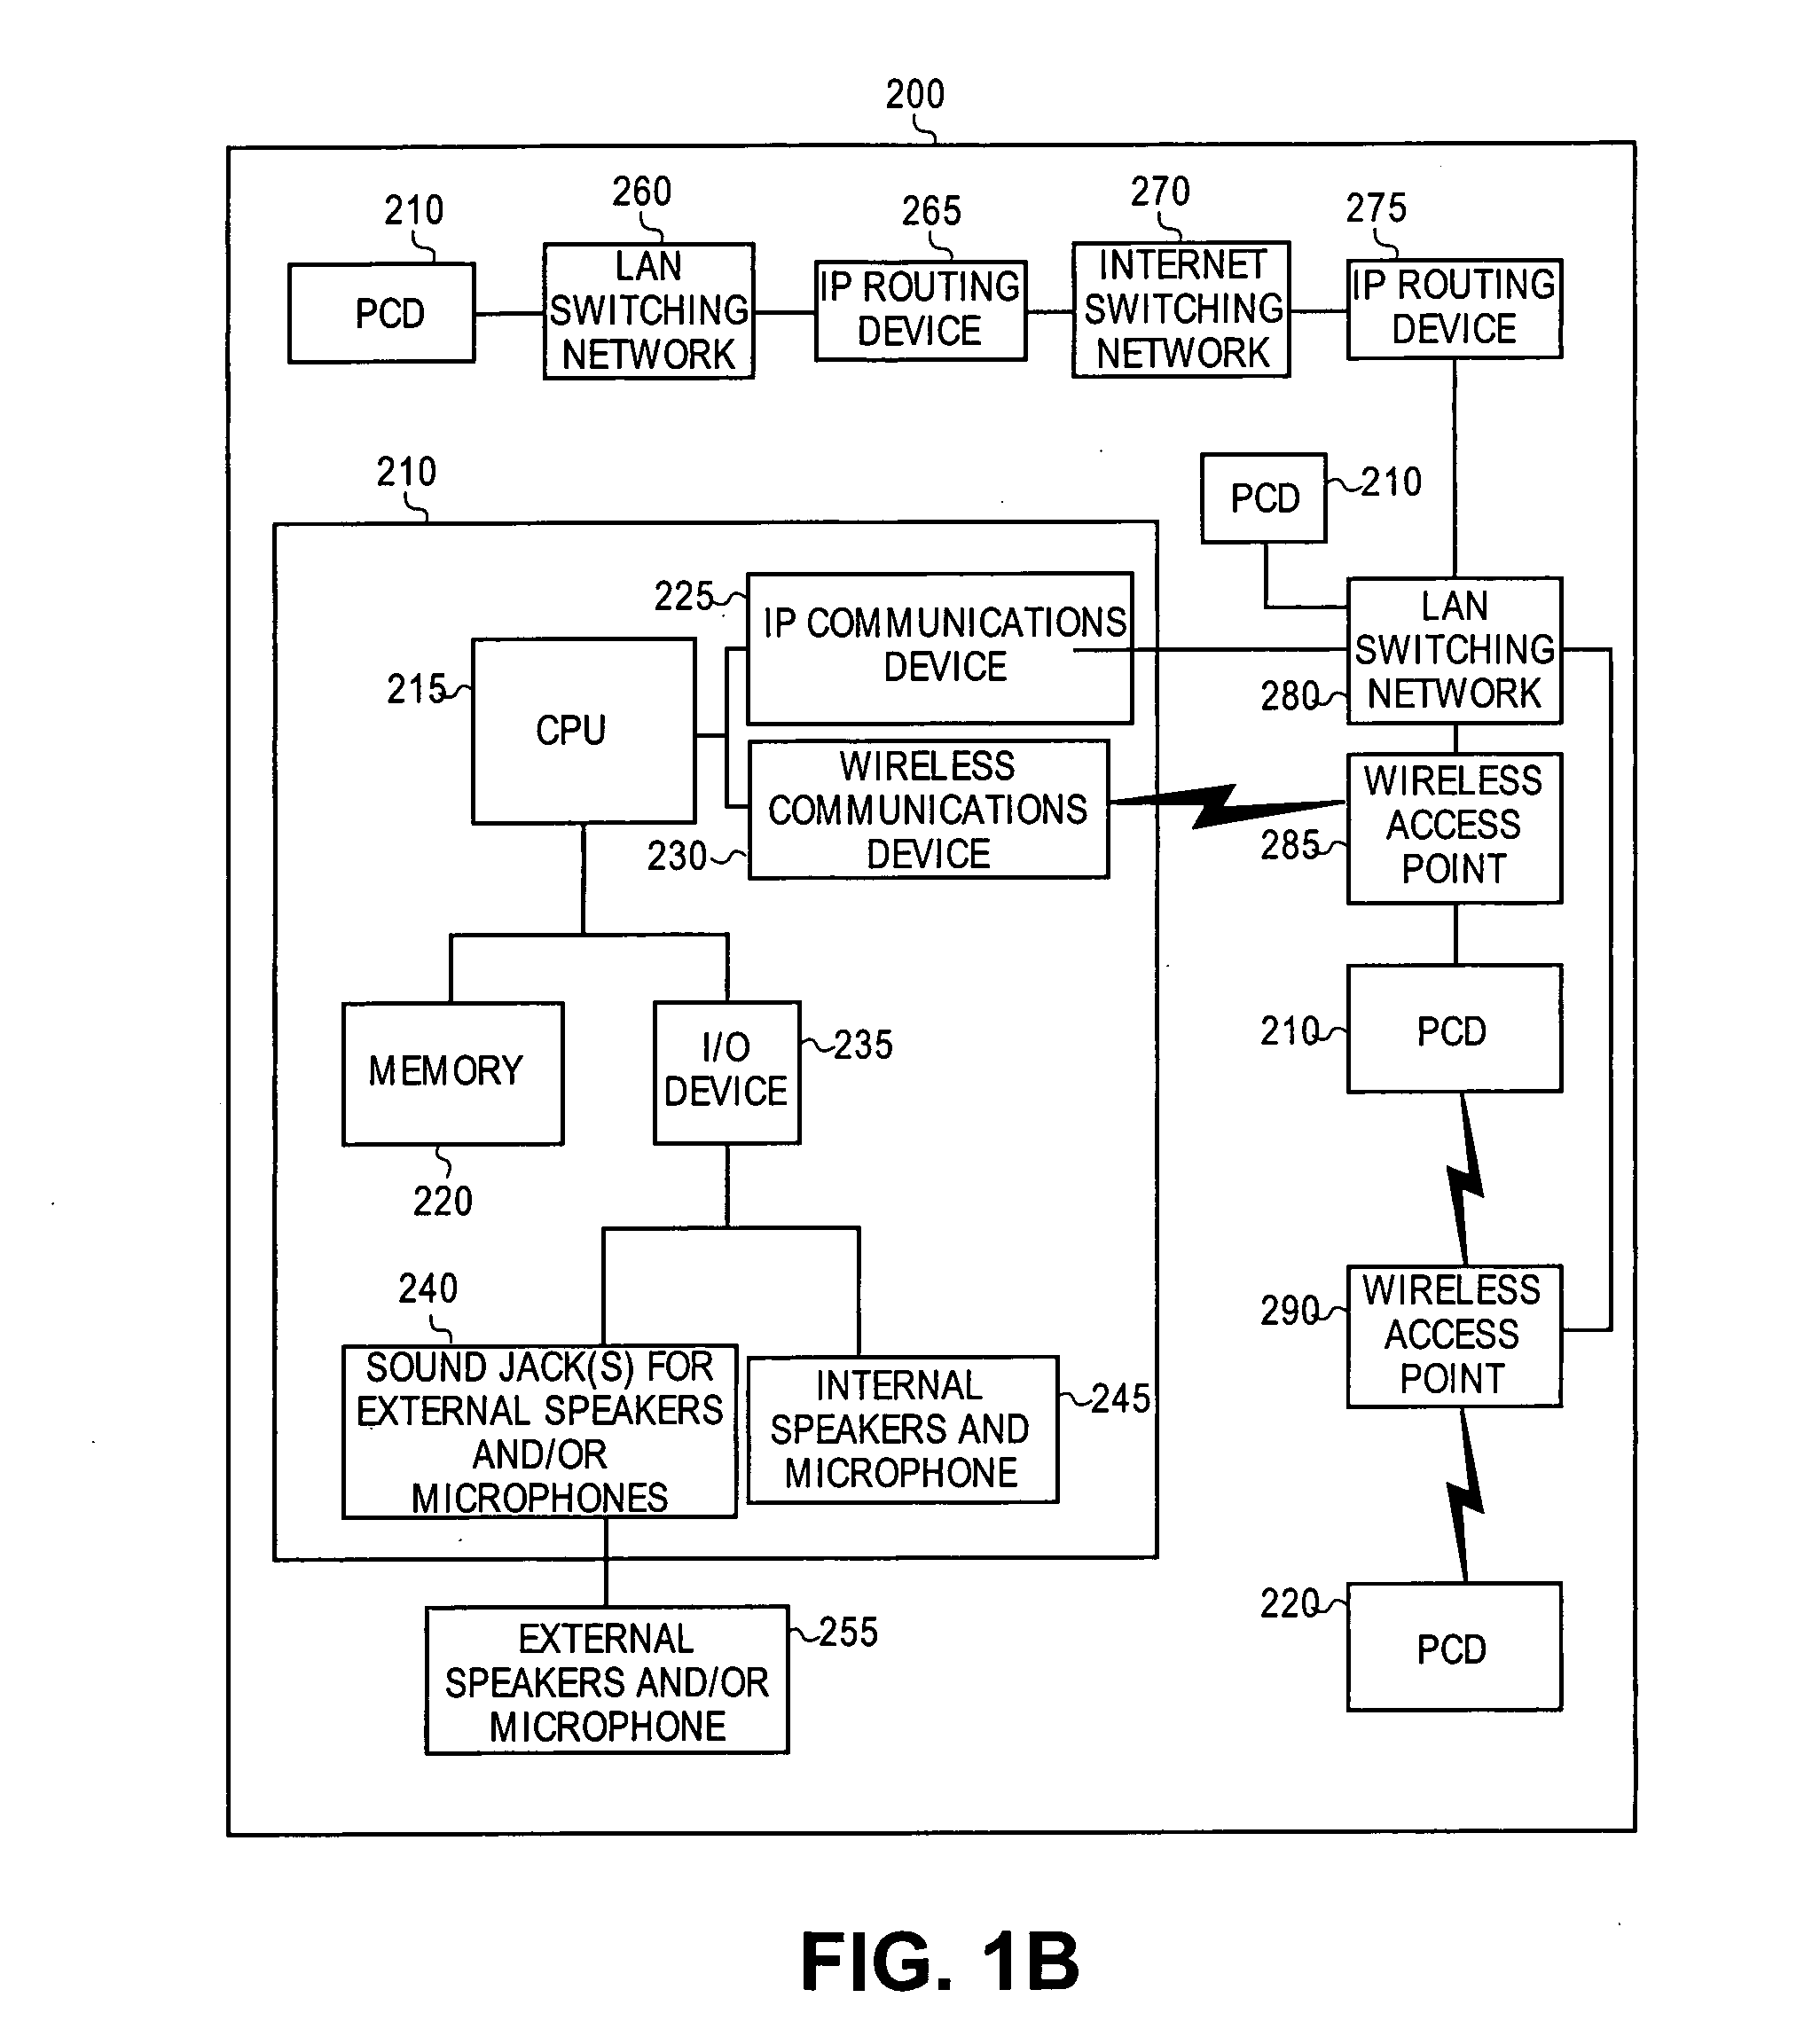 Group intercom, delayed playback, and ad-hoc based communications system and method